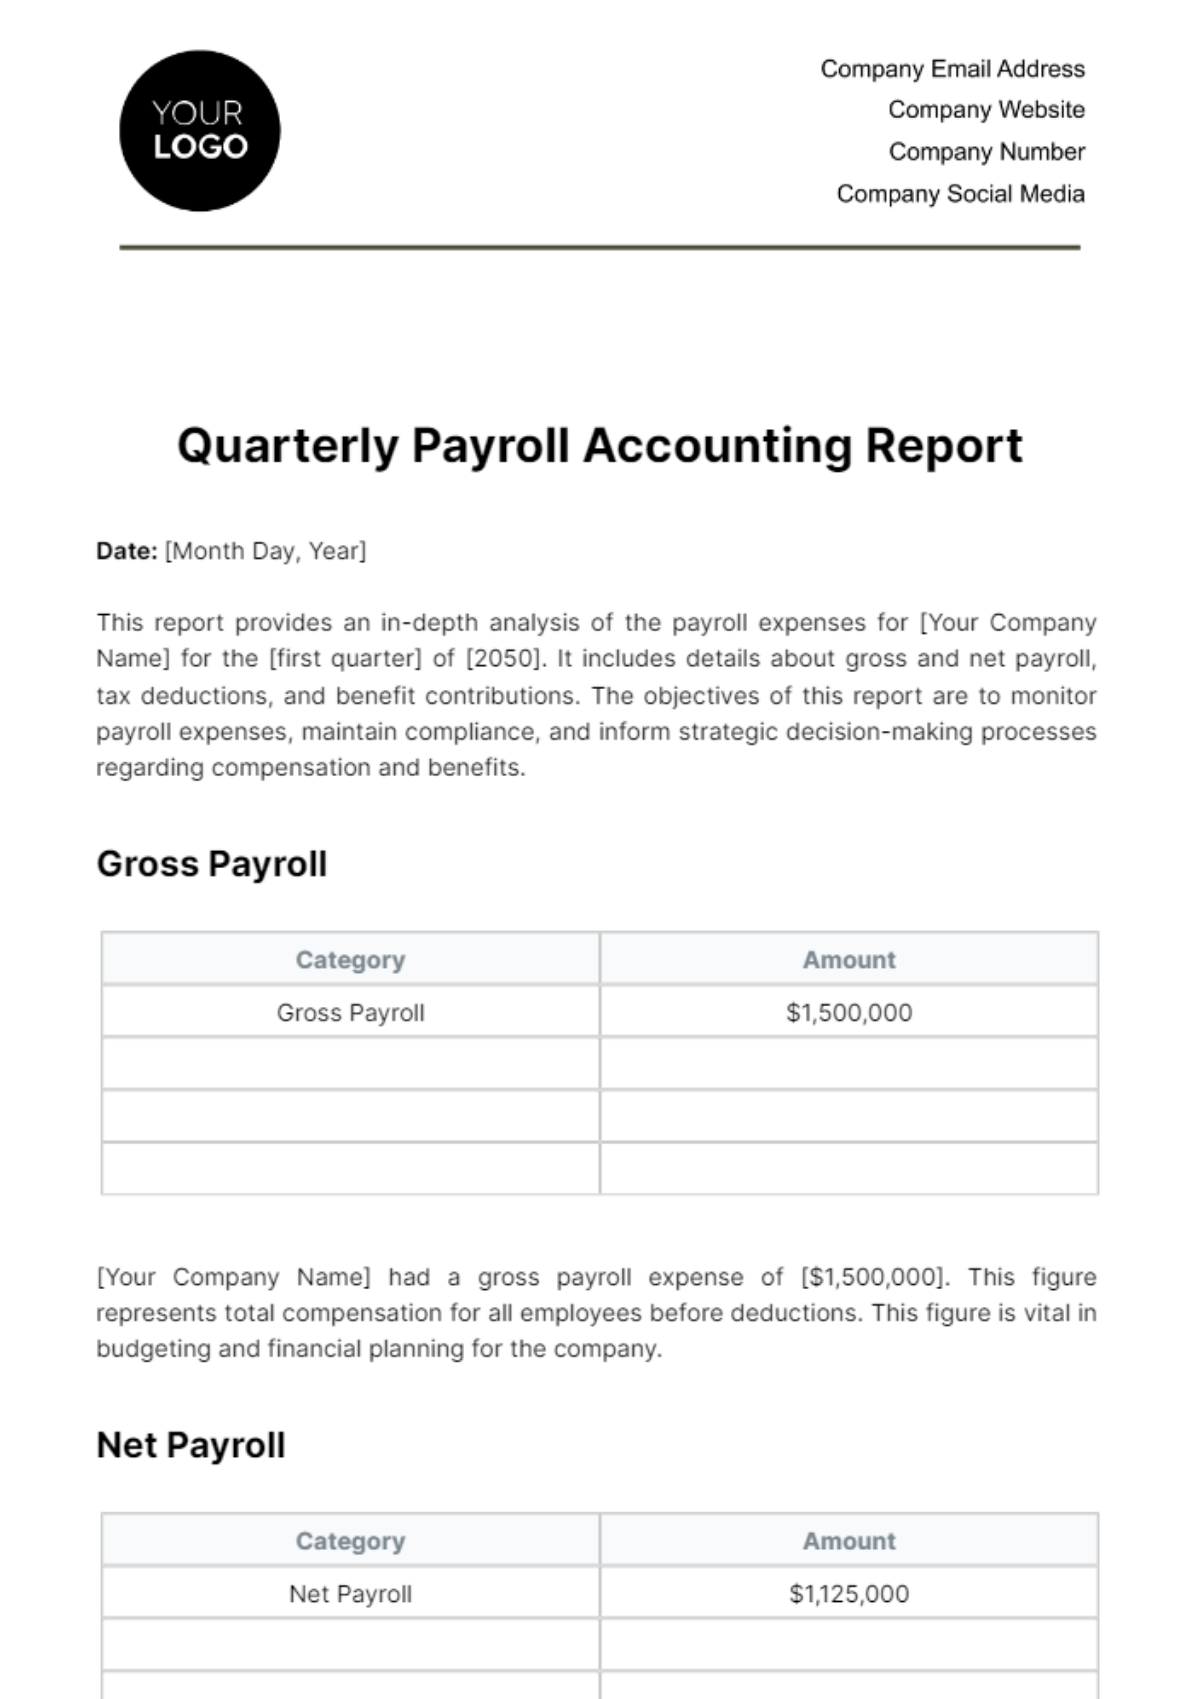 Quarterly Payroll Accounting Report Template